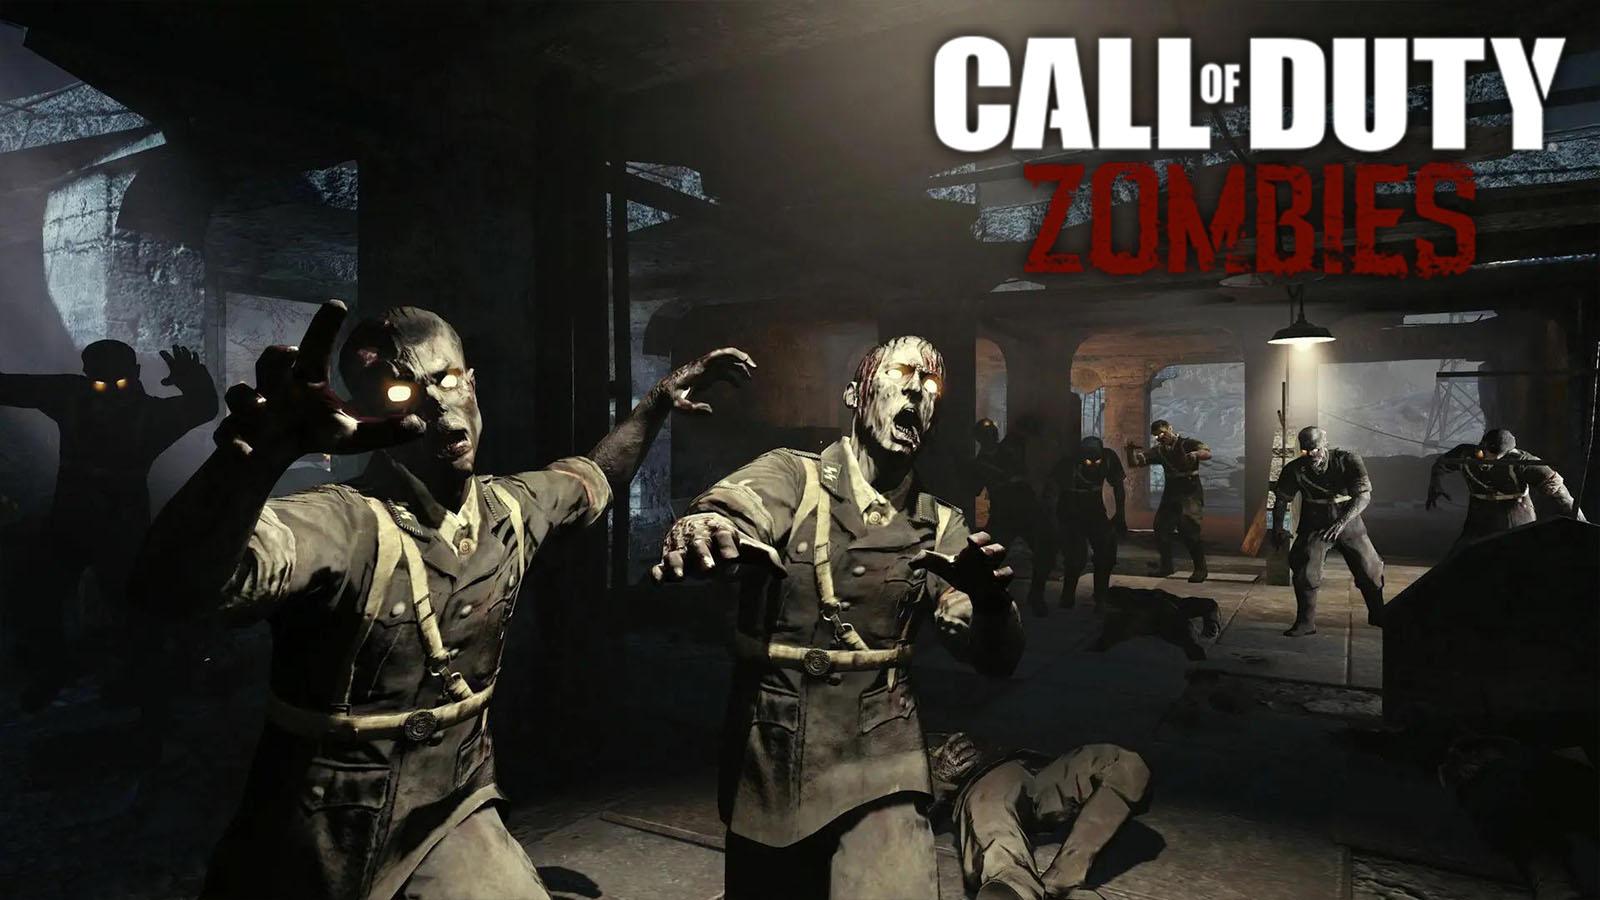 Call of duty zombies free to play